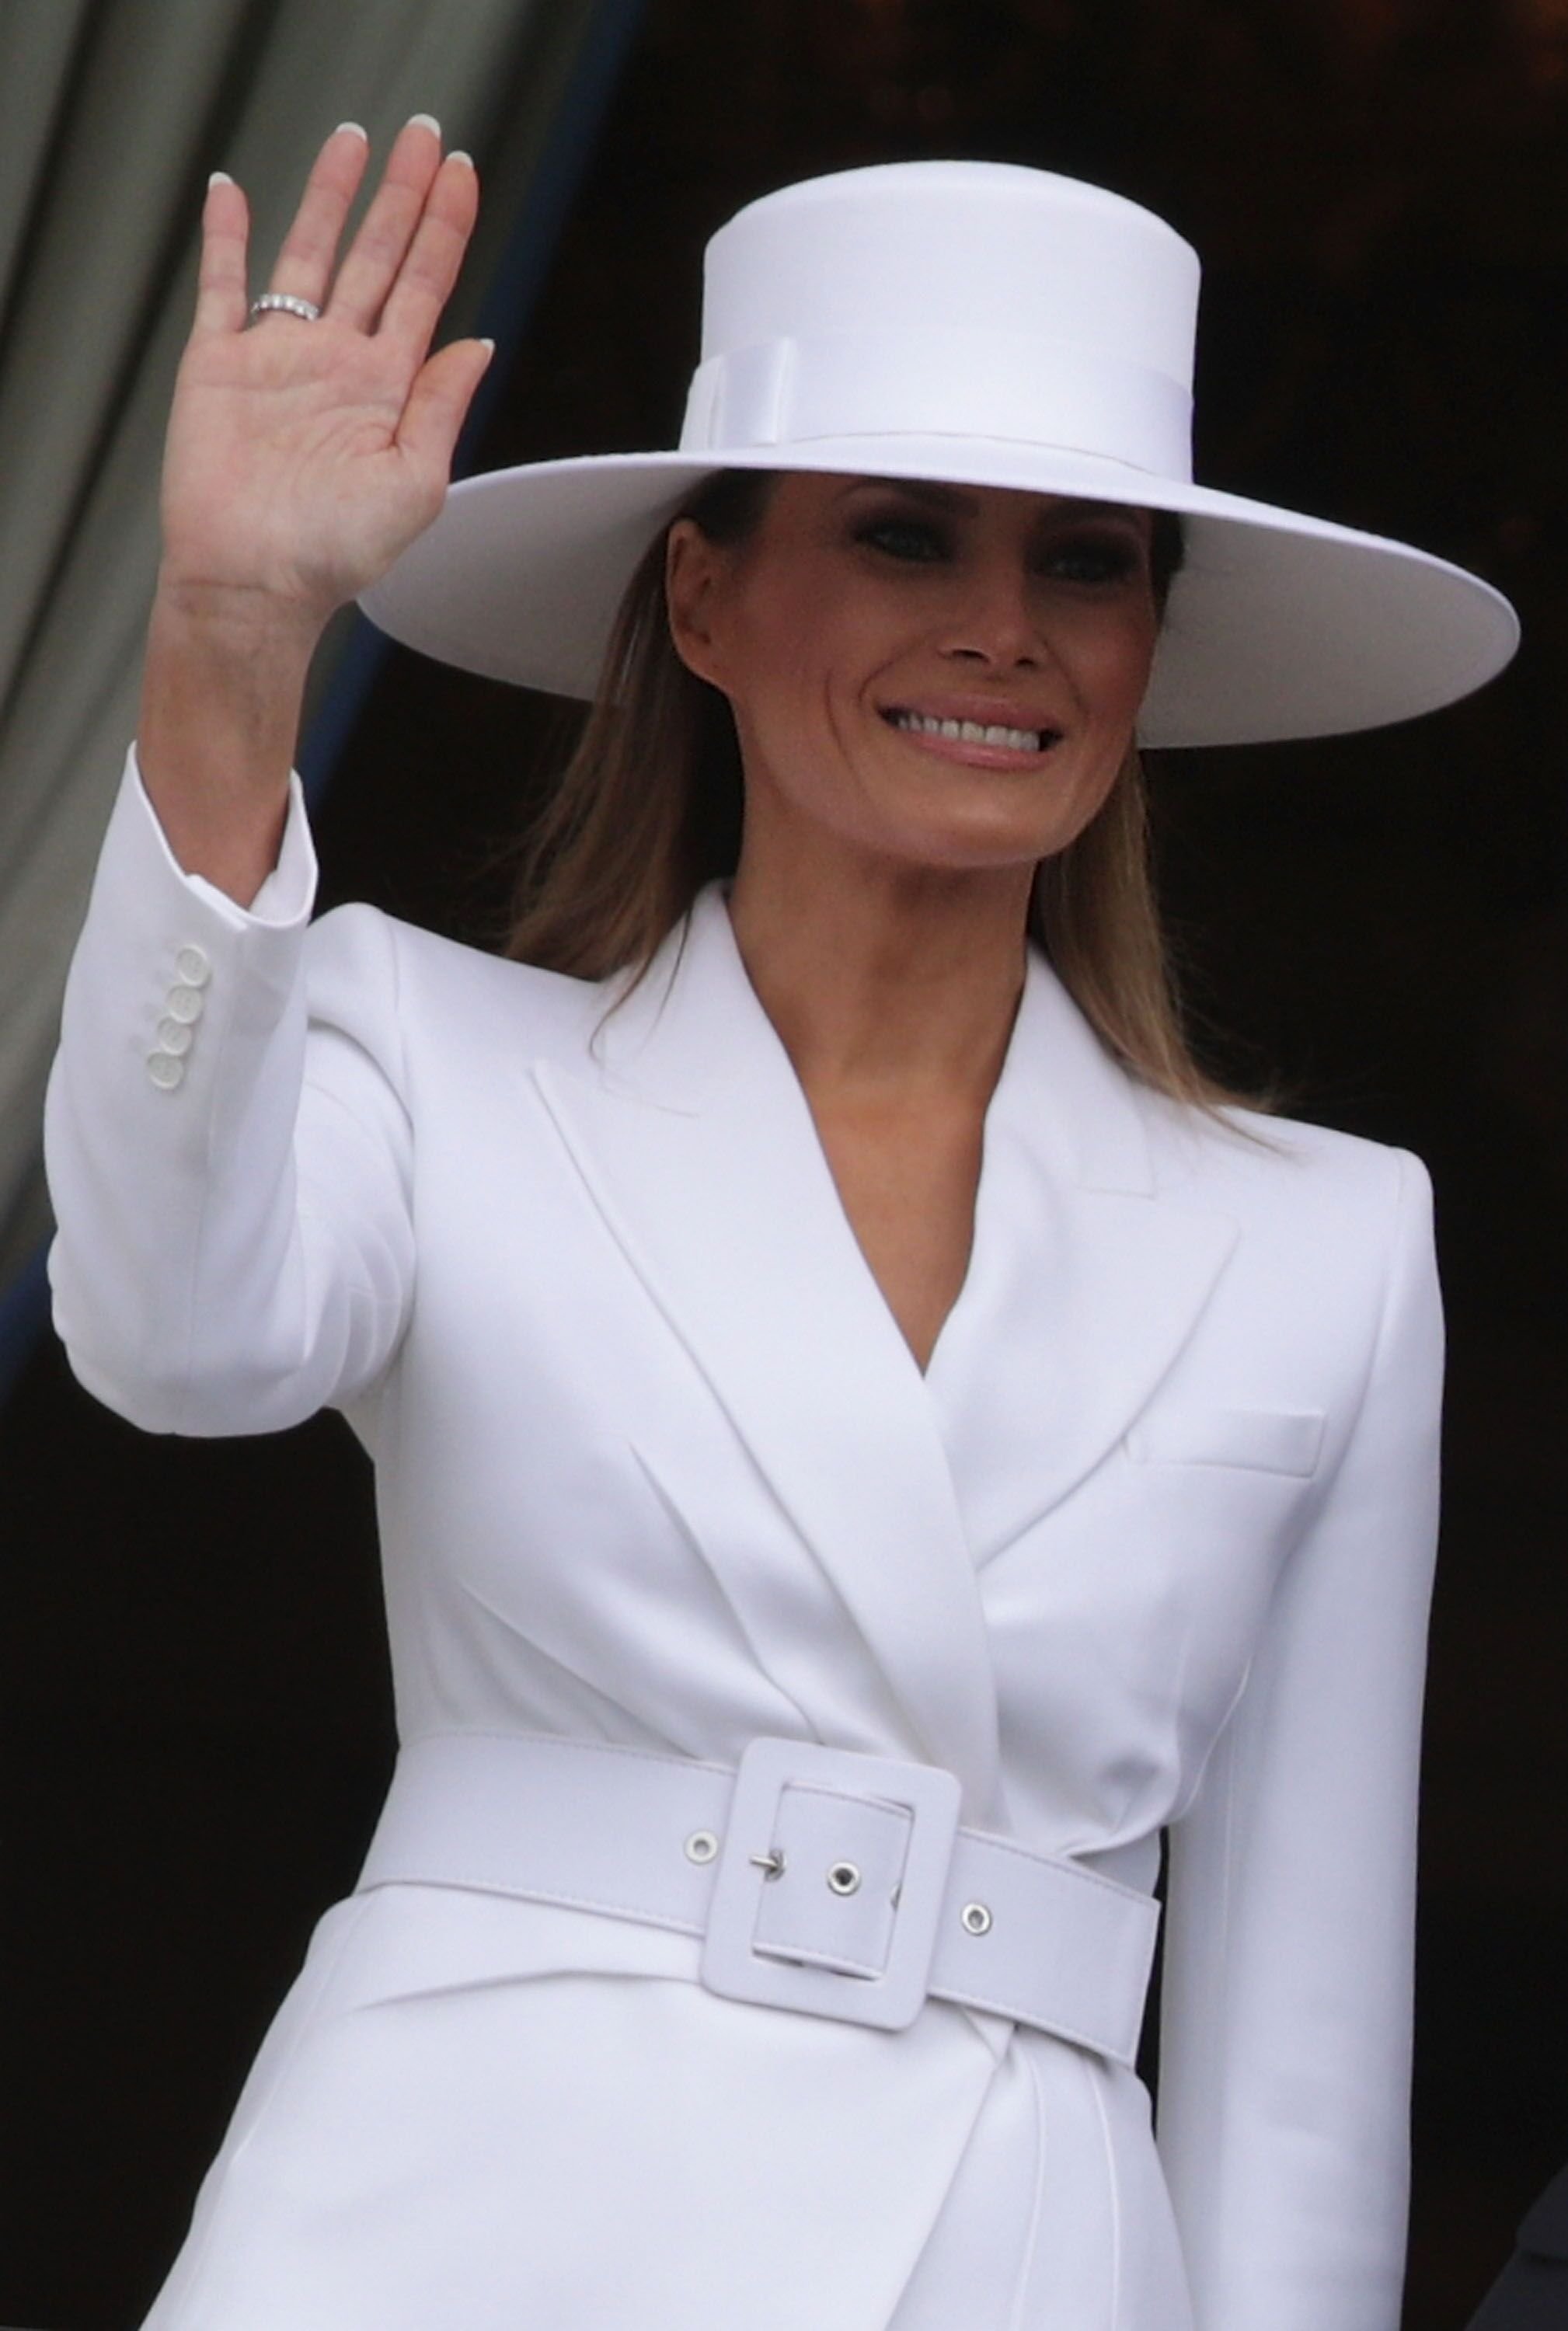 U.S. first lady Melania Trump waves during a state arrival ceremony at the South Lawn of the White House April 24, 2018 in Washington, DC | Photo: Getty Images